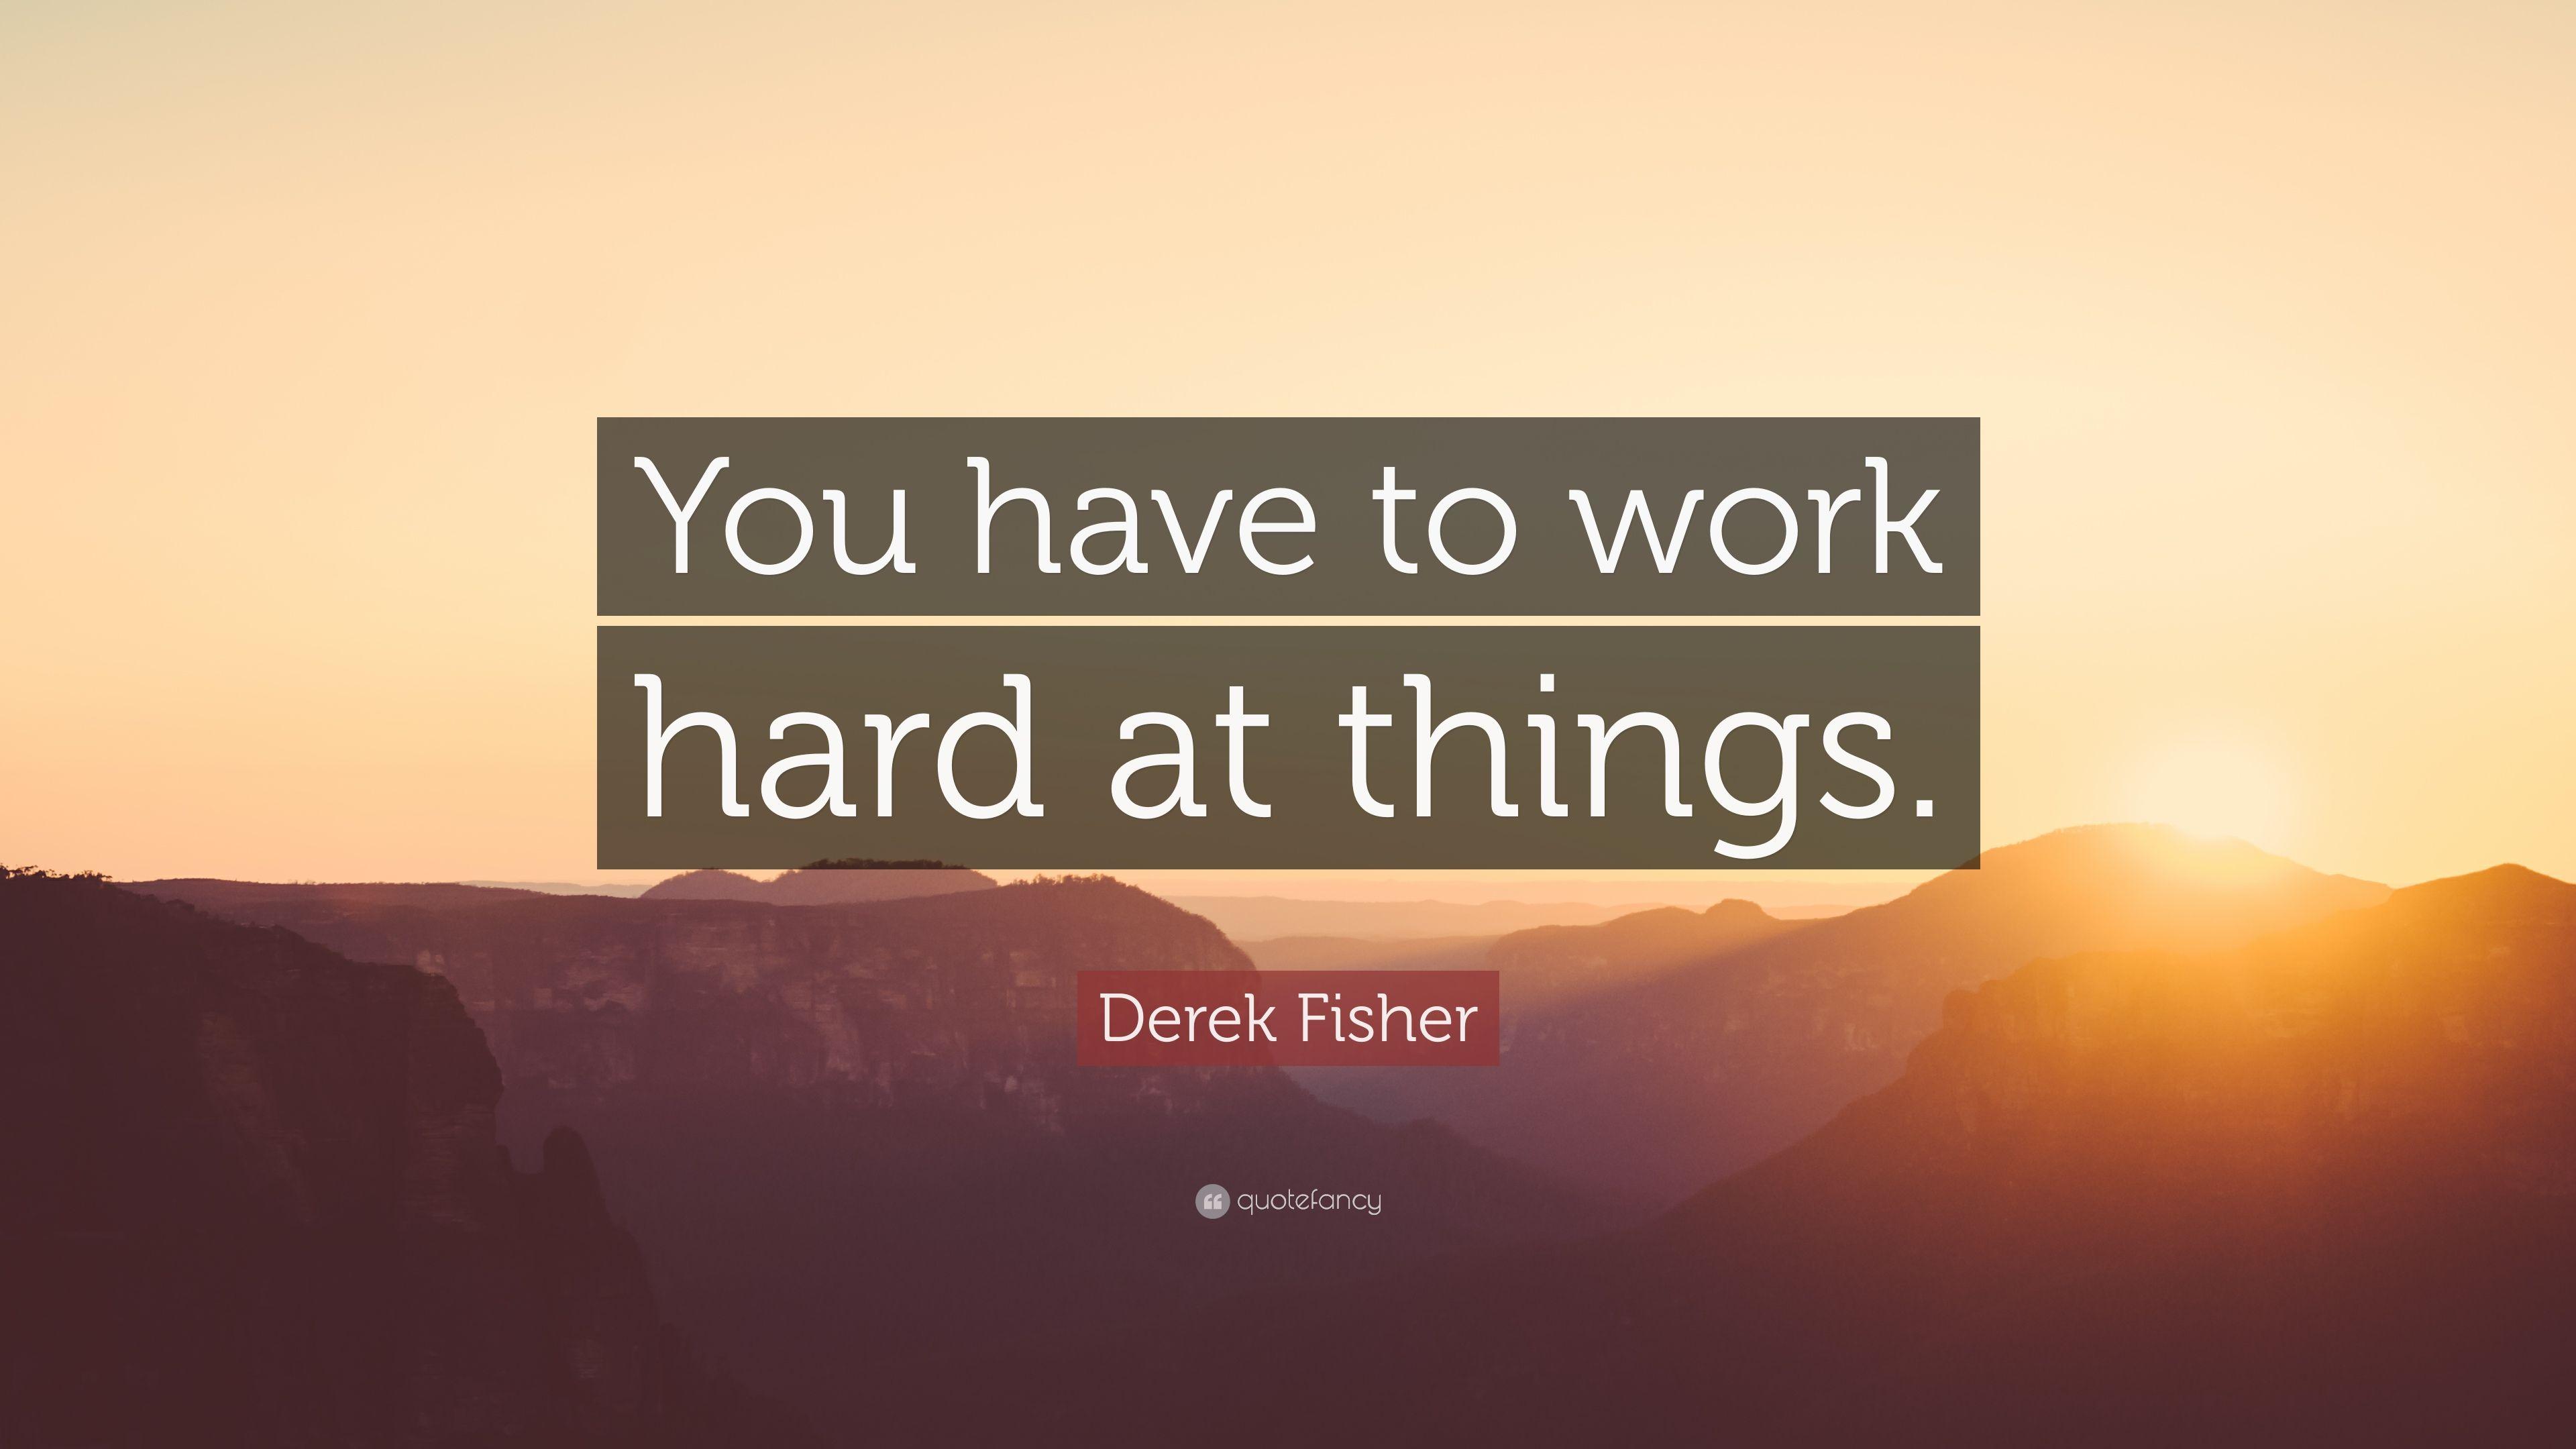 Derek Fisher Quote: “You have to work hard at things.” 5